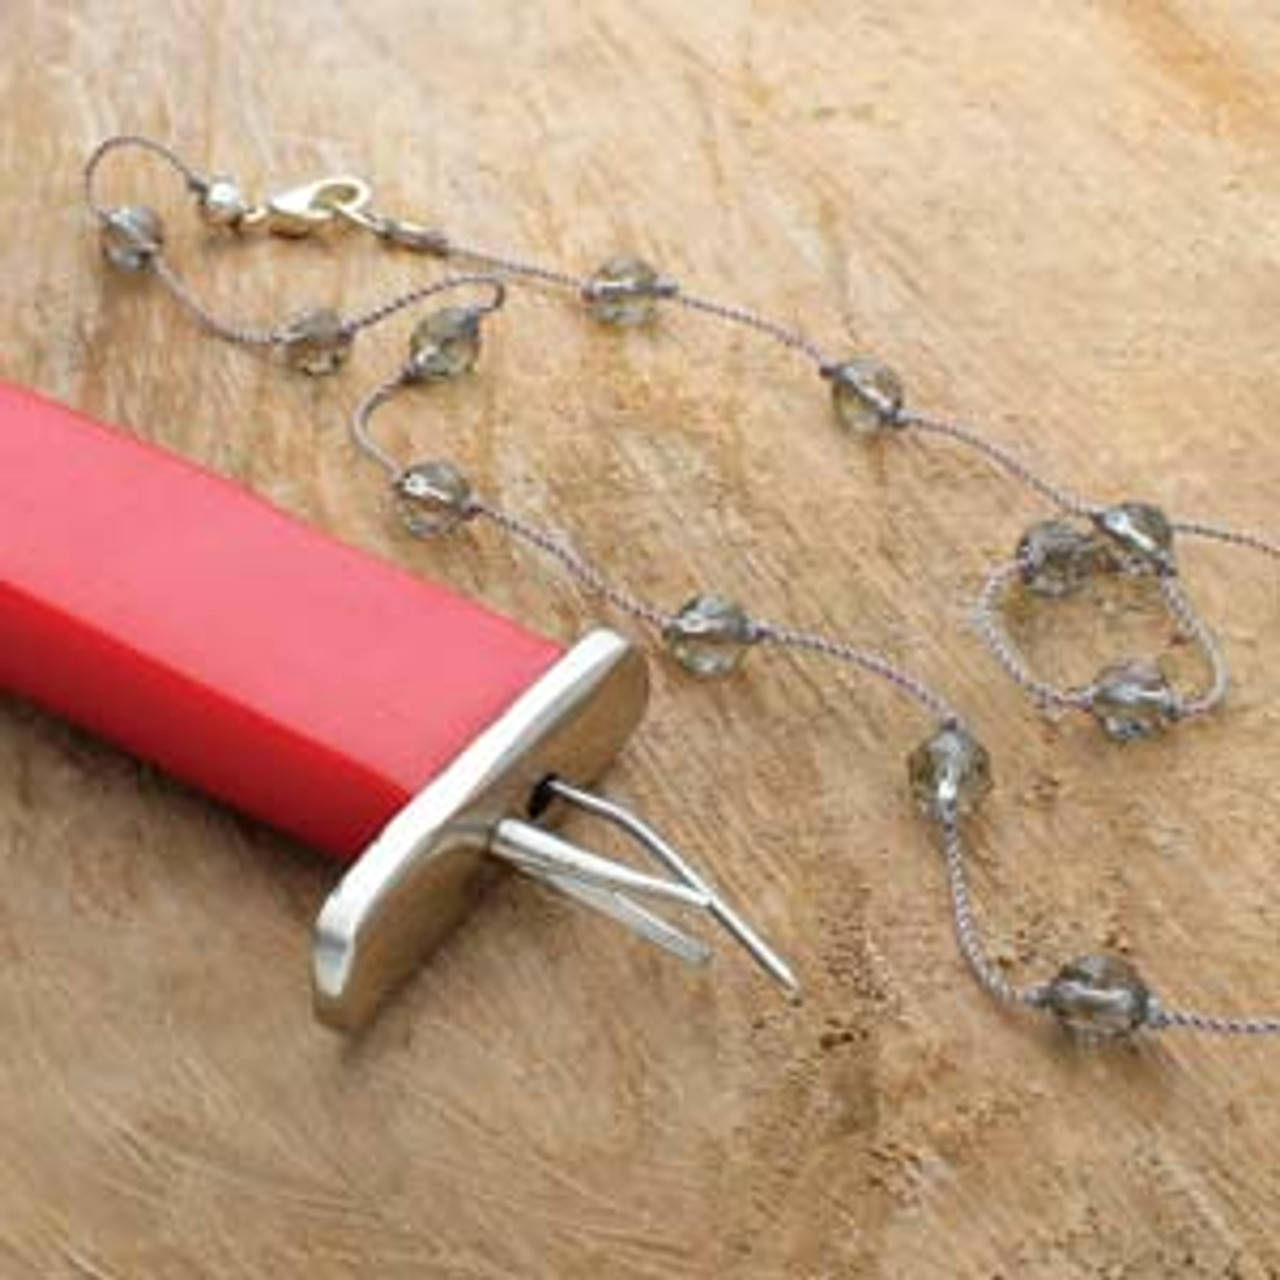 How to Use EZ Knotter Bead And Pearl Knotting Tool 